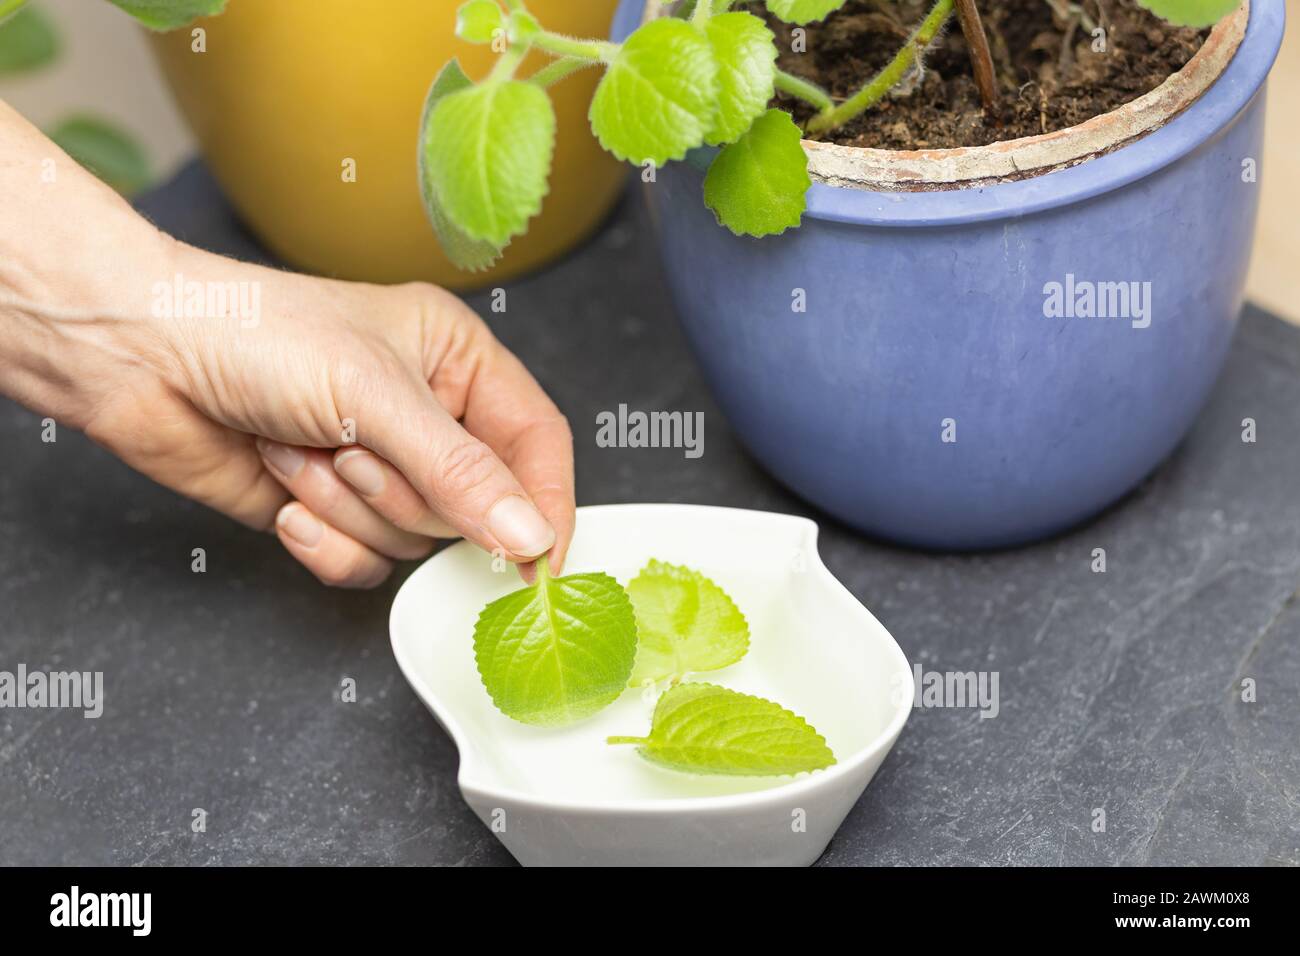 Preparation of Silver Spurflower Tea. Hands of a woman are dipping petals of a plant in hot water. This tea is used to treat colds. Stock Photo